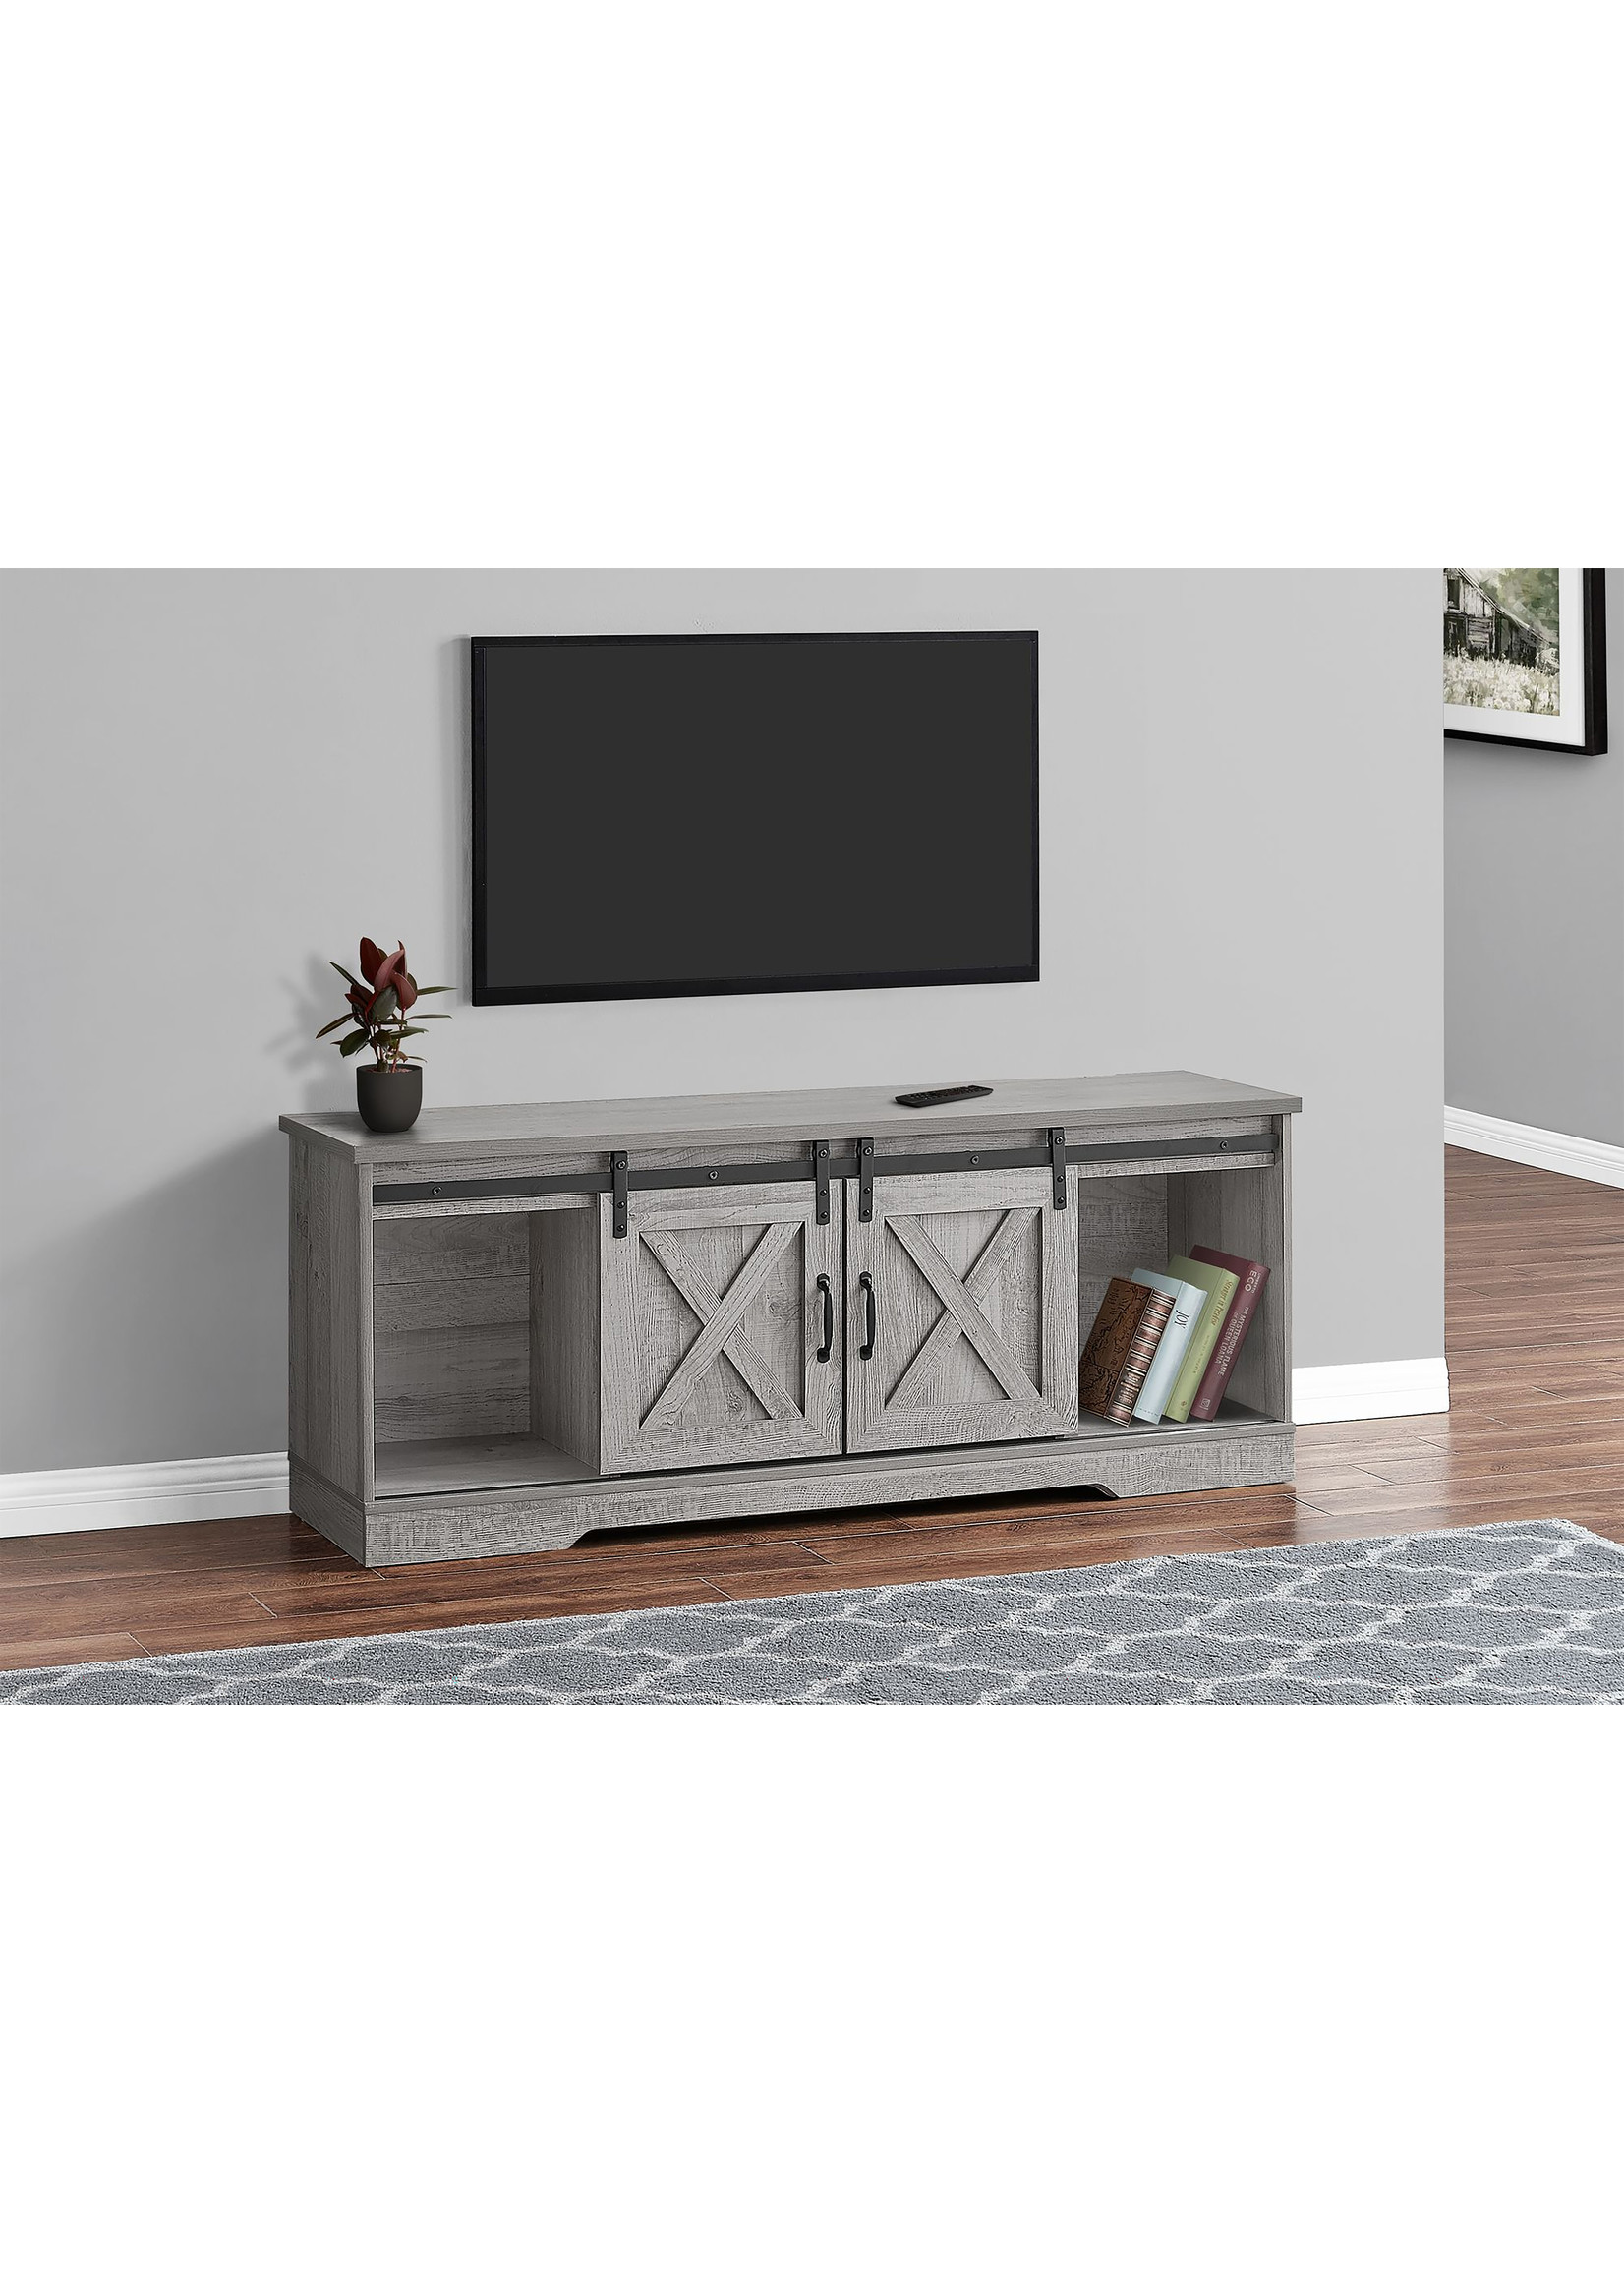 TV STAND - 60"L / Grey With 2 Sliding Doors